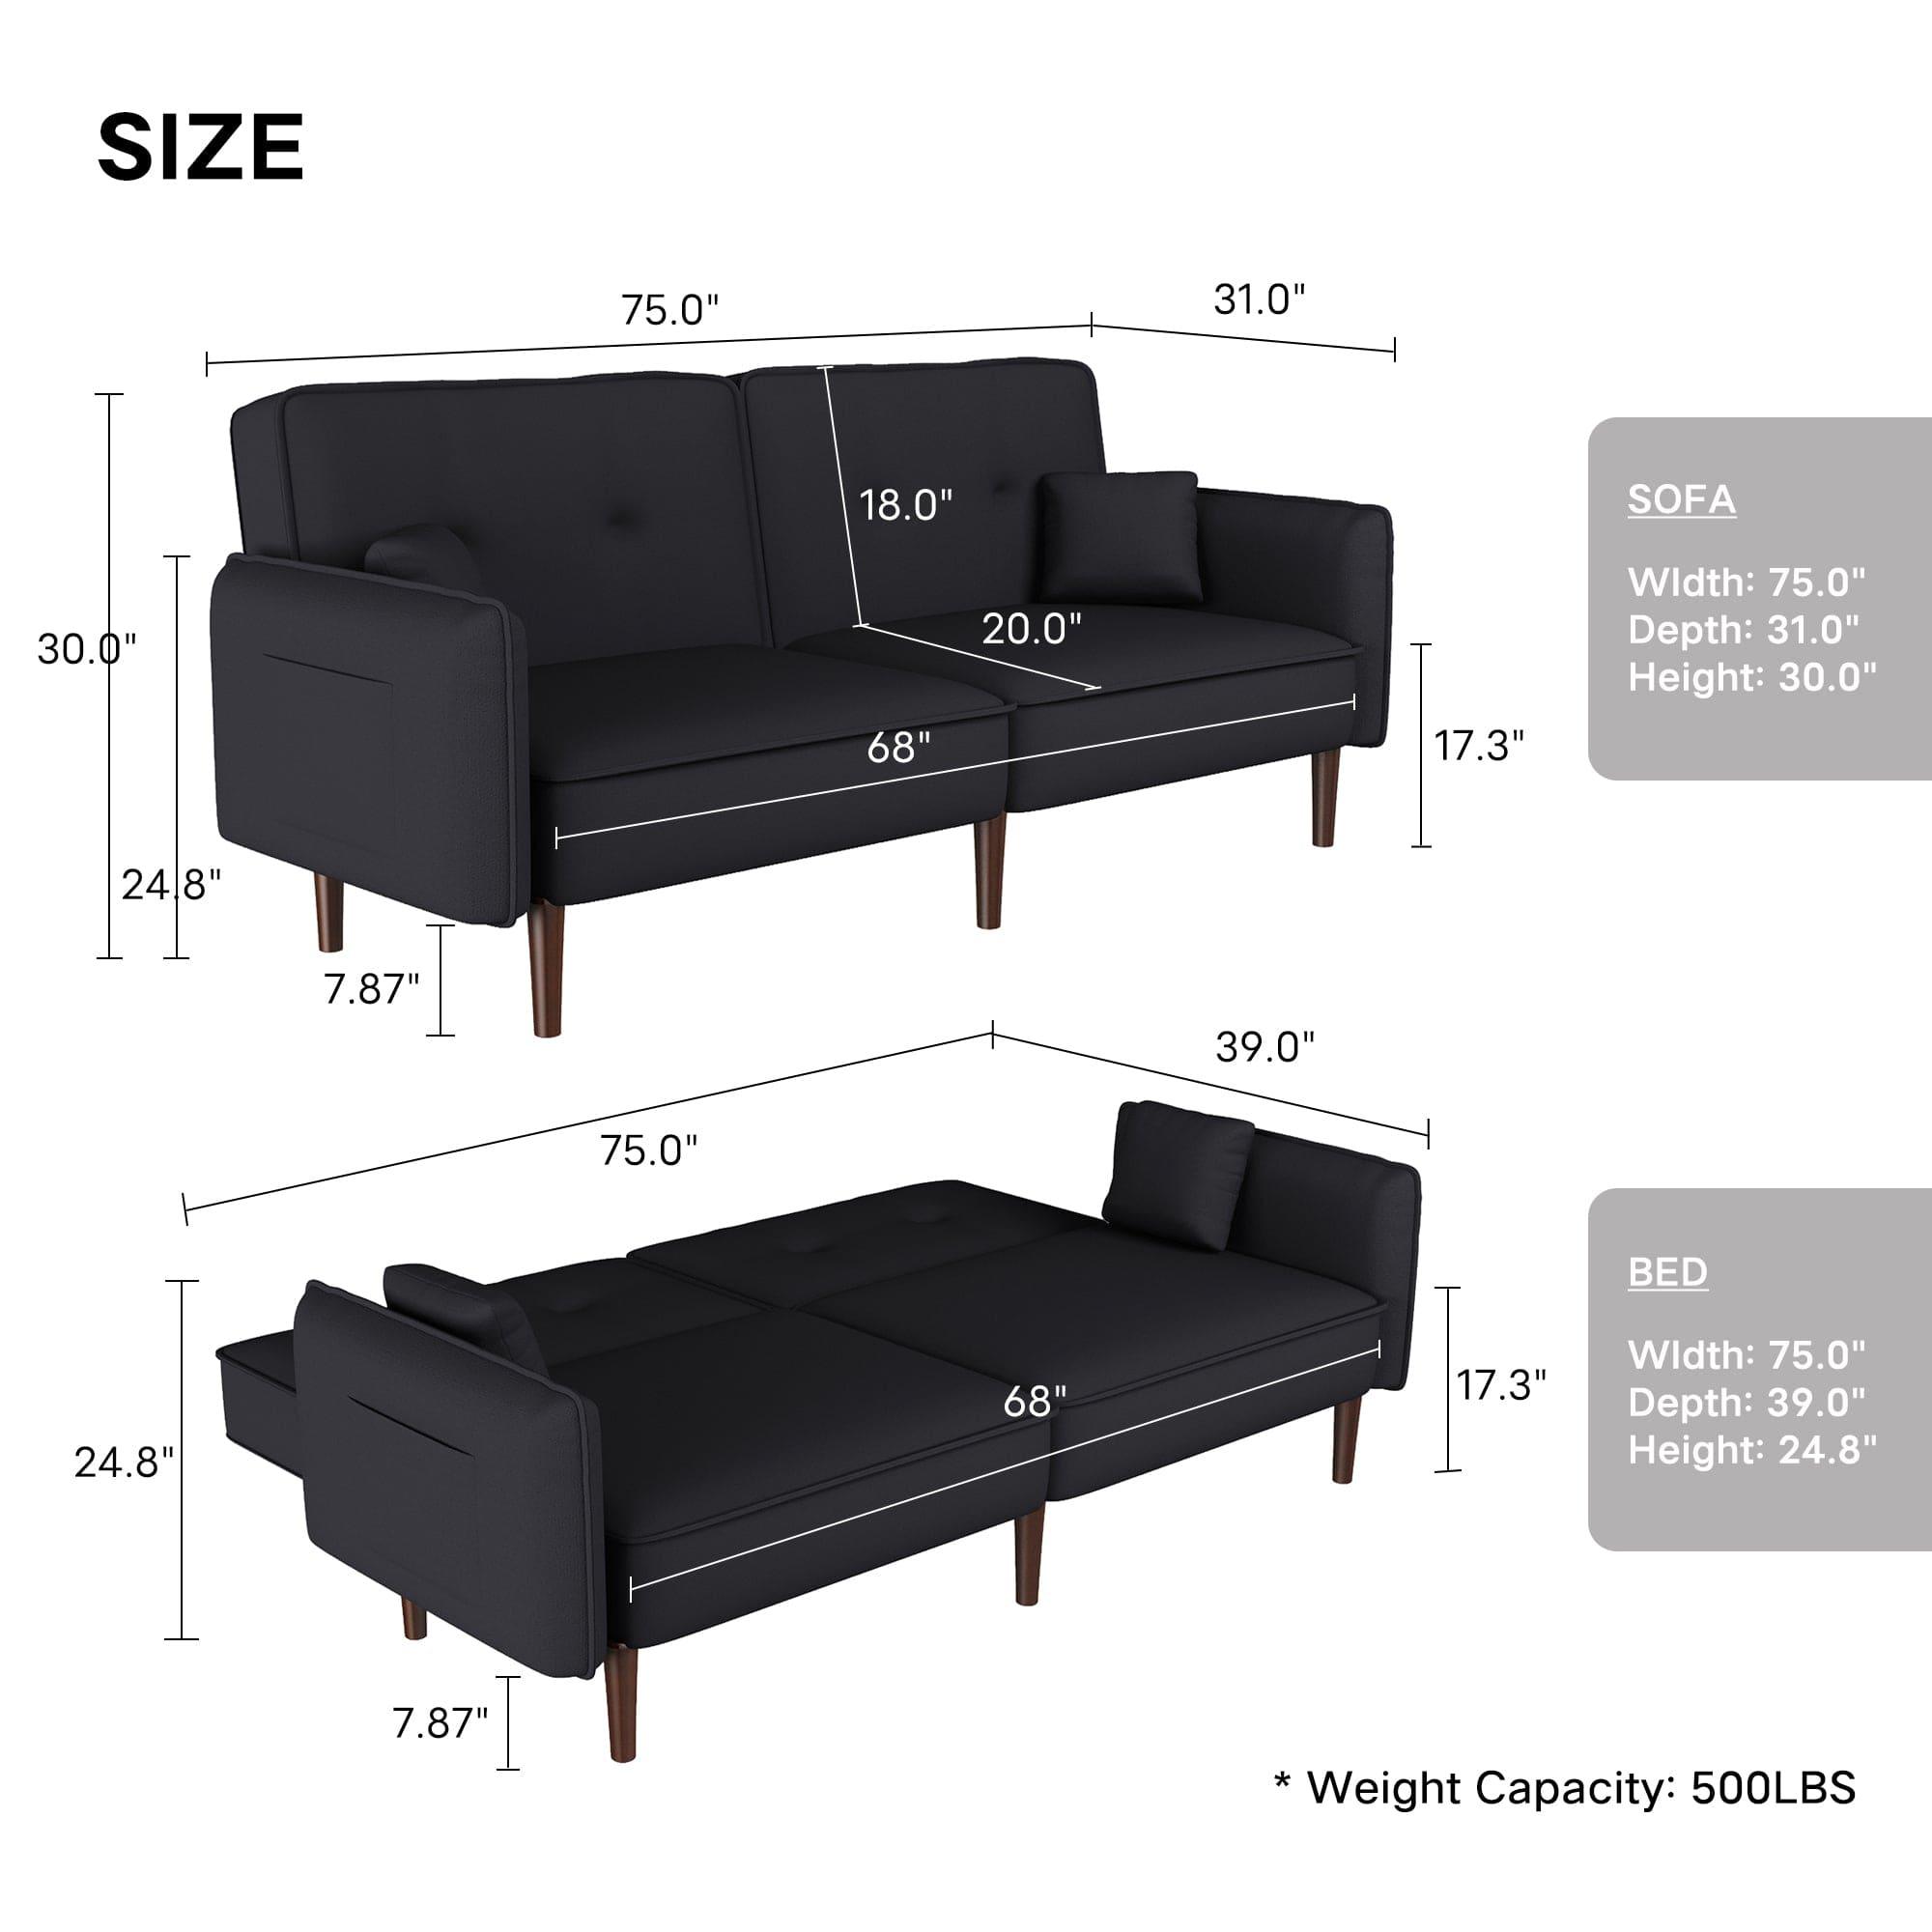 Shop Convertible Sofa Bed with Wood Legs in Cotton Linen Fabric(Black) Mademoiselle Home Decor